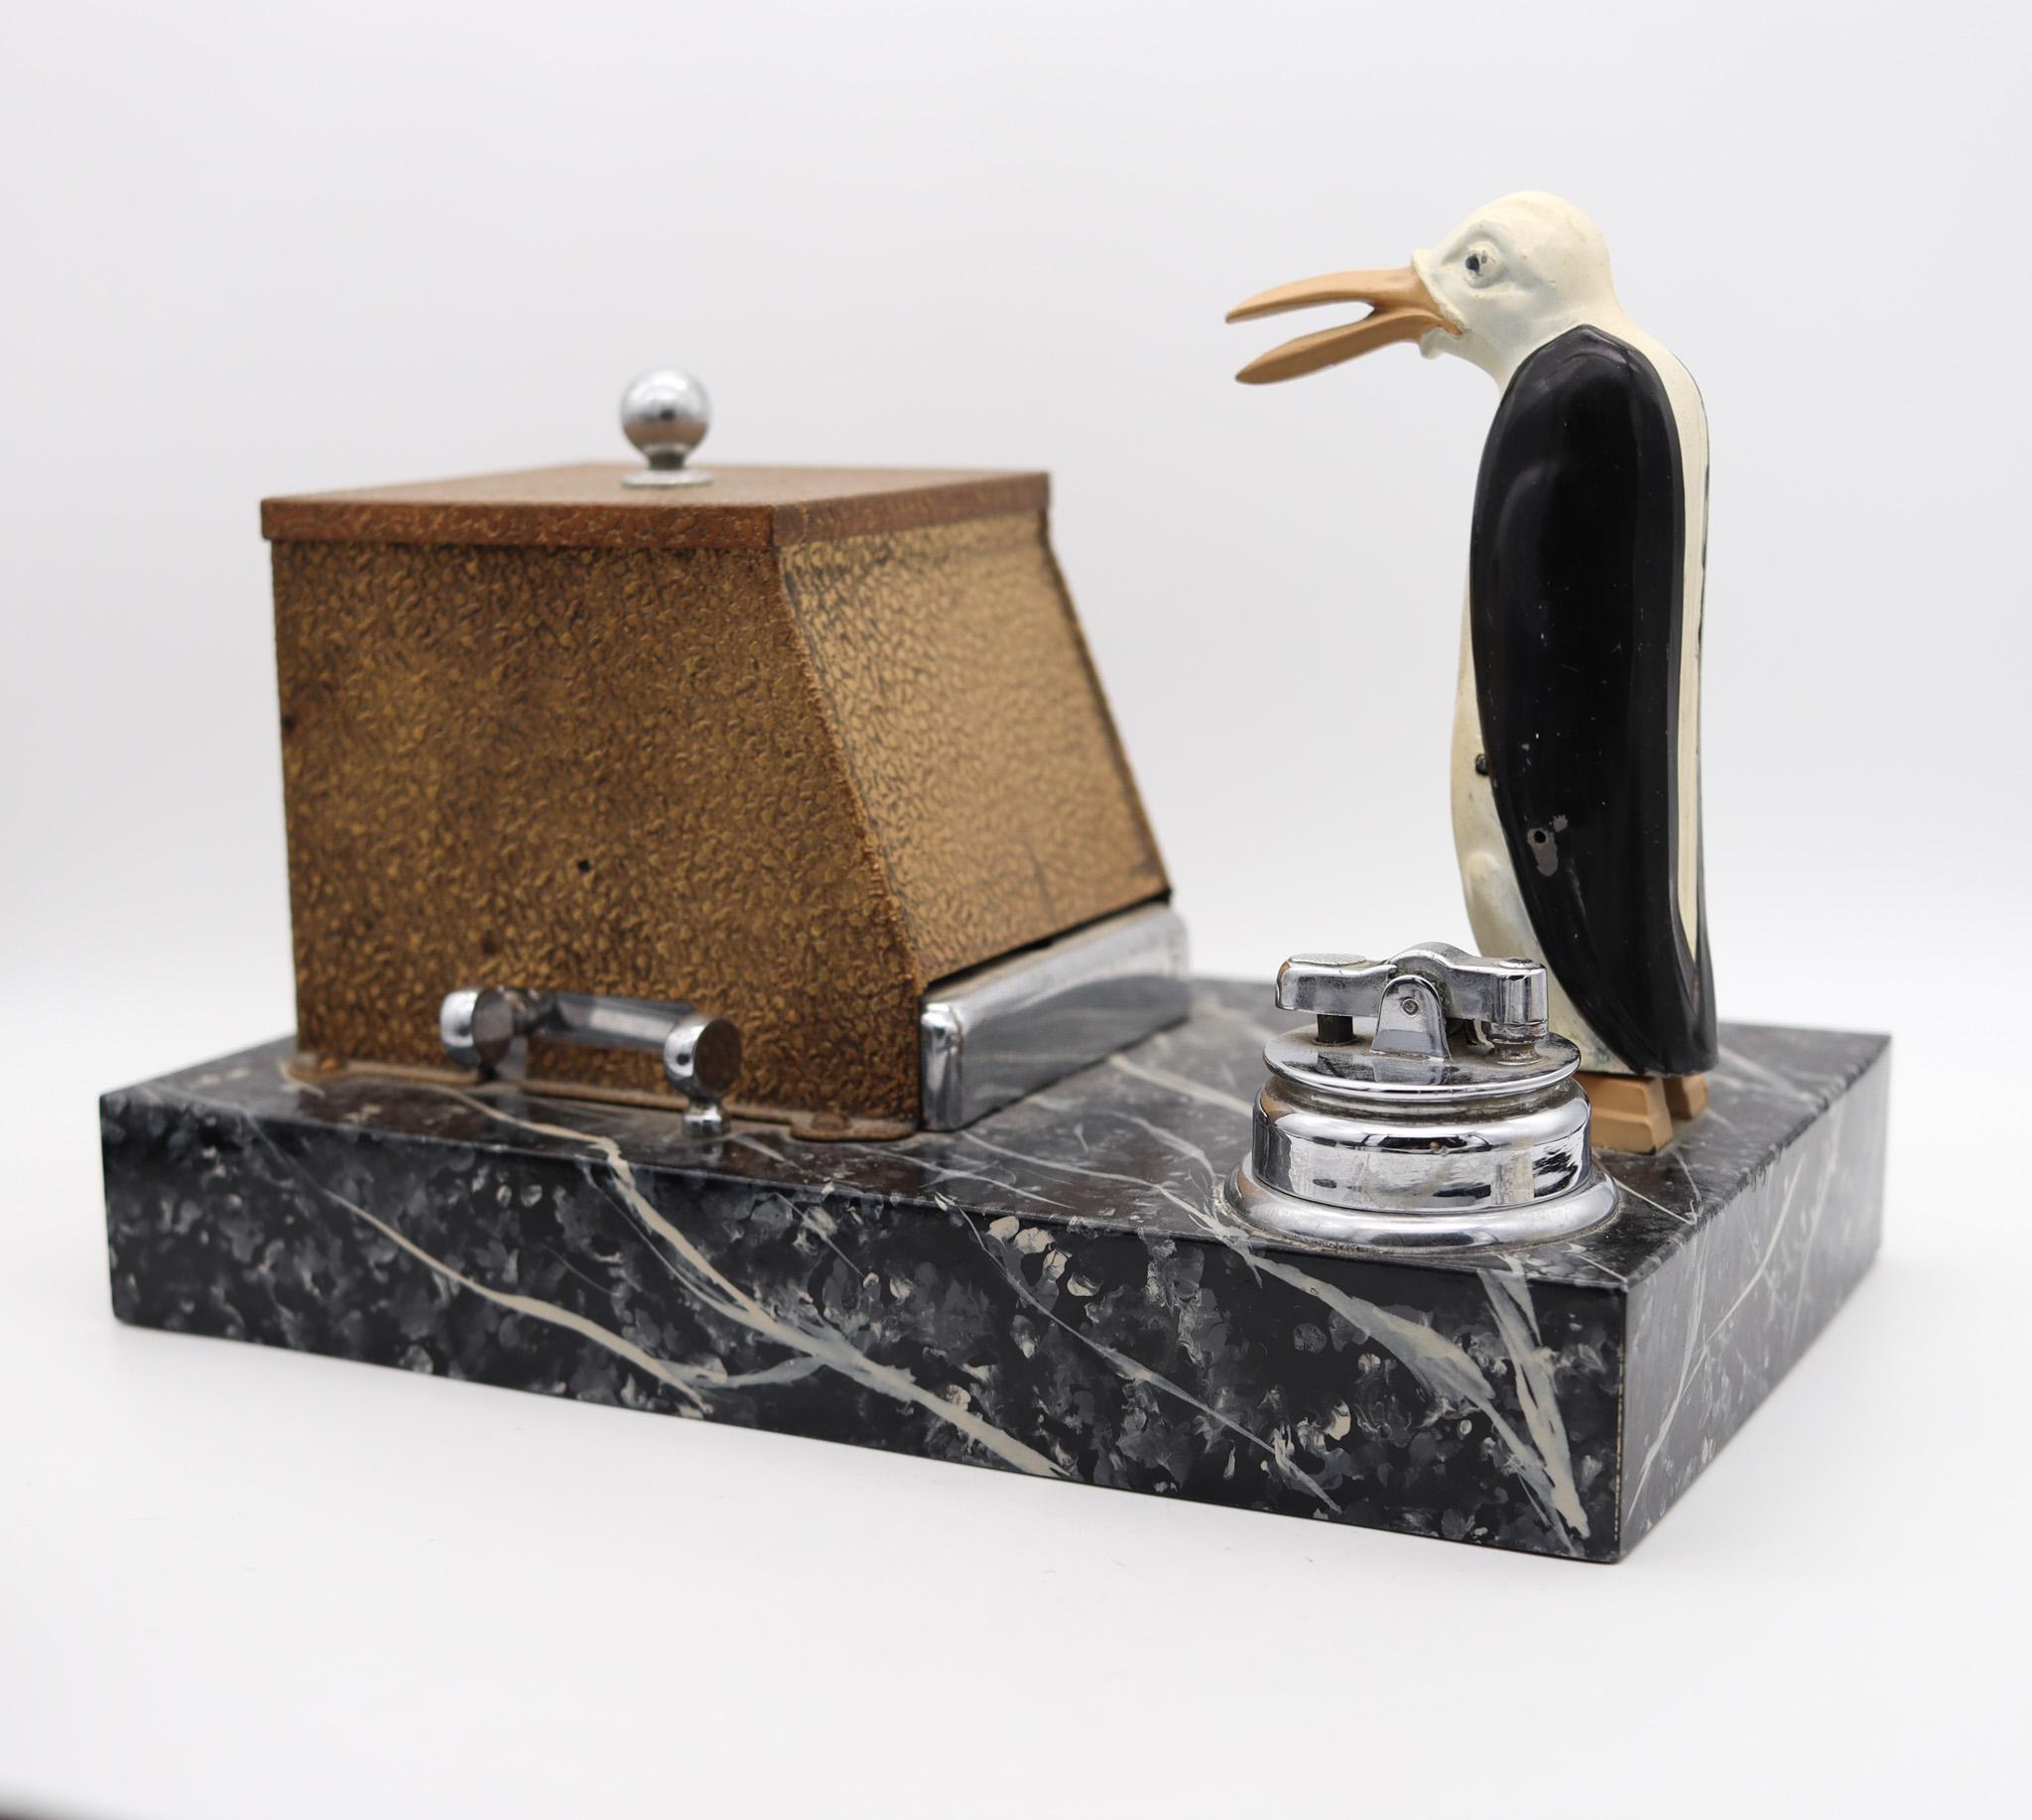 Art deco magic penguin mechanical dispenser box designed by Ronson.

A beautiful, exceedingly rare and very decorative mechanical dispenser desk box, created in the city of Newark, New Jersey in the United States by The Ronson Art Metal Works Co.